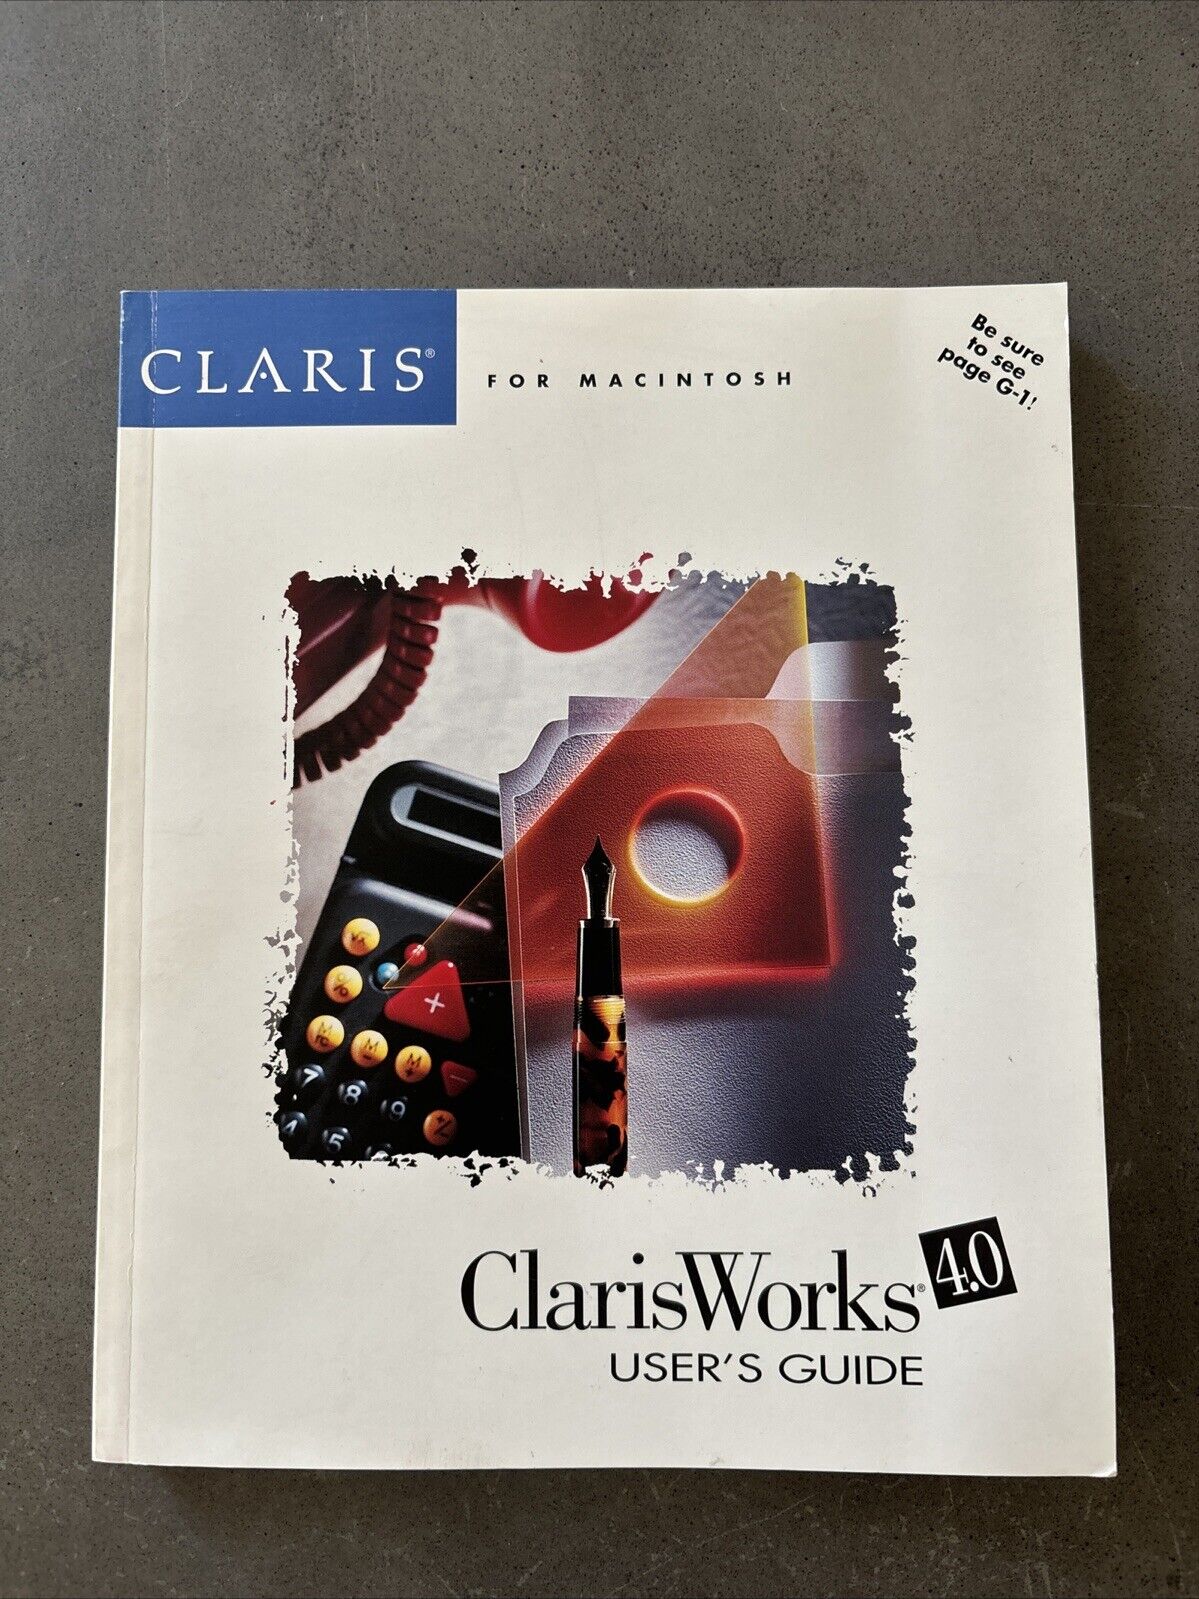 Claris Works 4.0 for Macintosh - User's Guide - Brand New